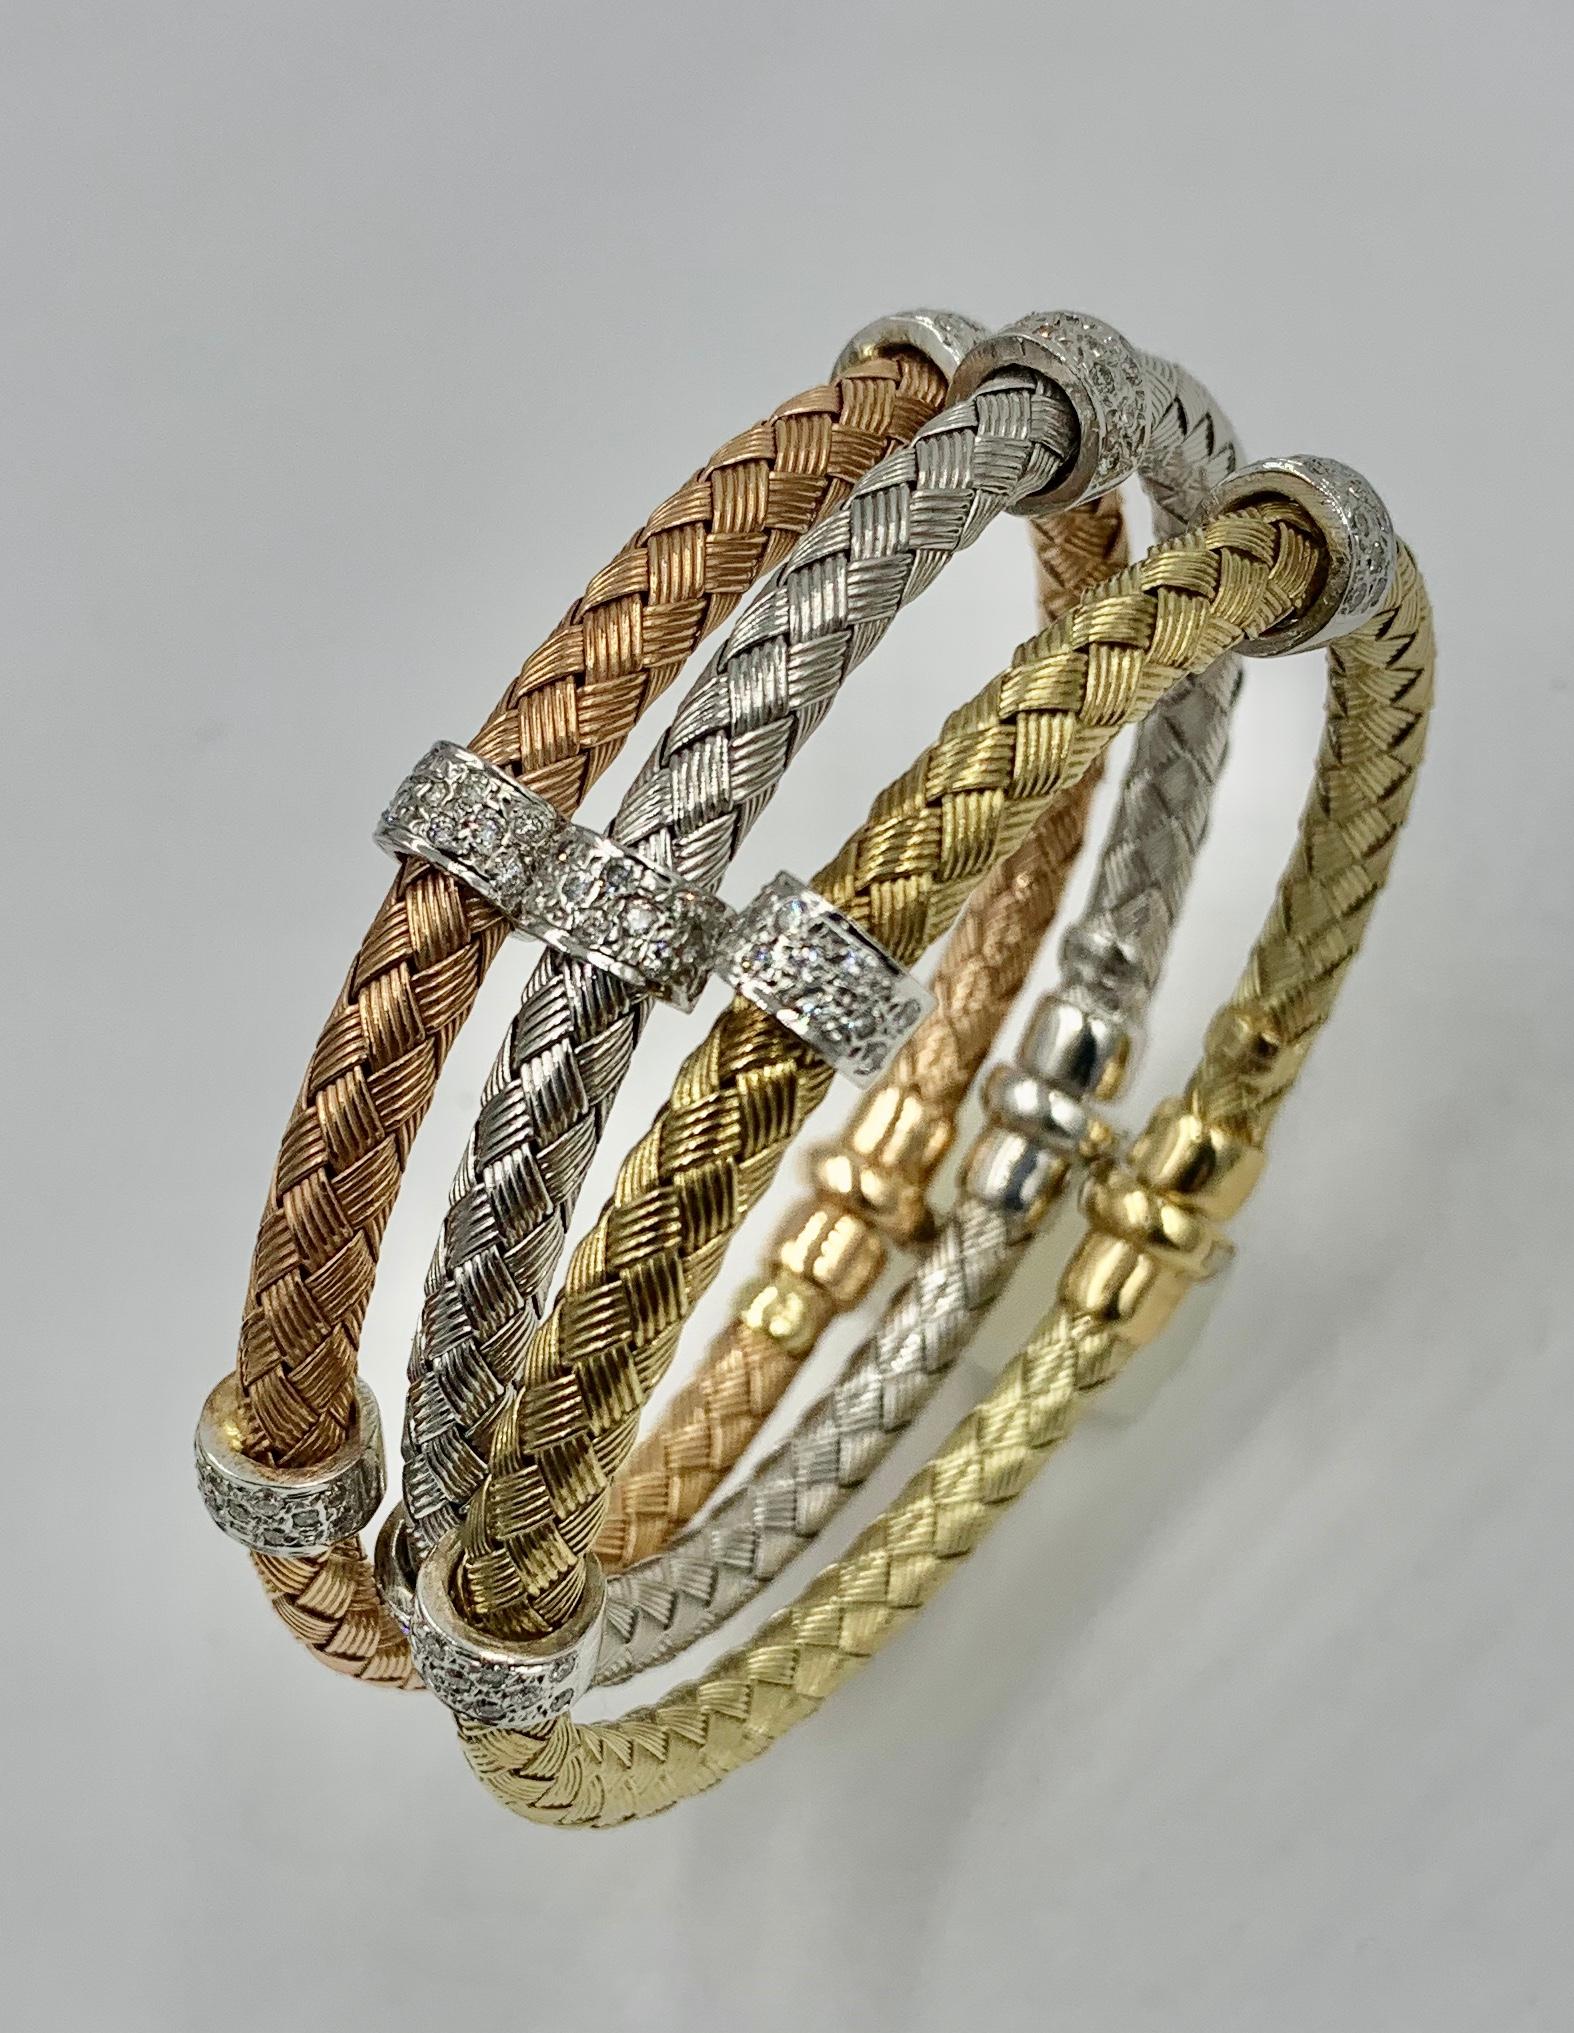 A wonderful and classic trio of three Braided Bangle Bracelets in 14 Karat Yellow, Rose and White Gold set with Diamond Rondelles.  The classic stacking Bracelets are Italian.  They have a stunning braided cable design, one in 14 Karat Rose Gold,